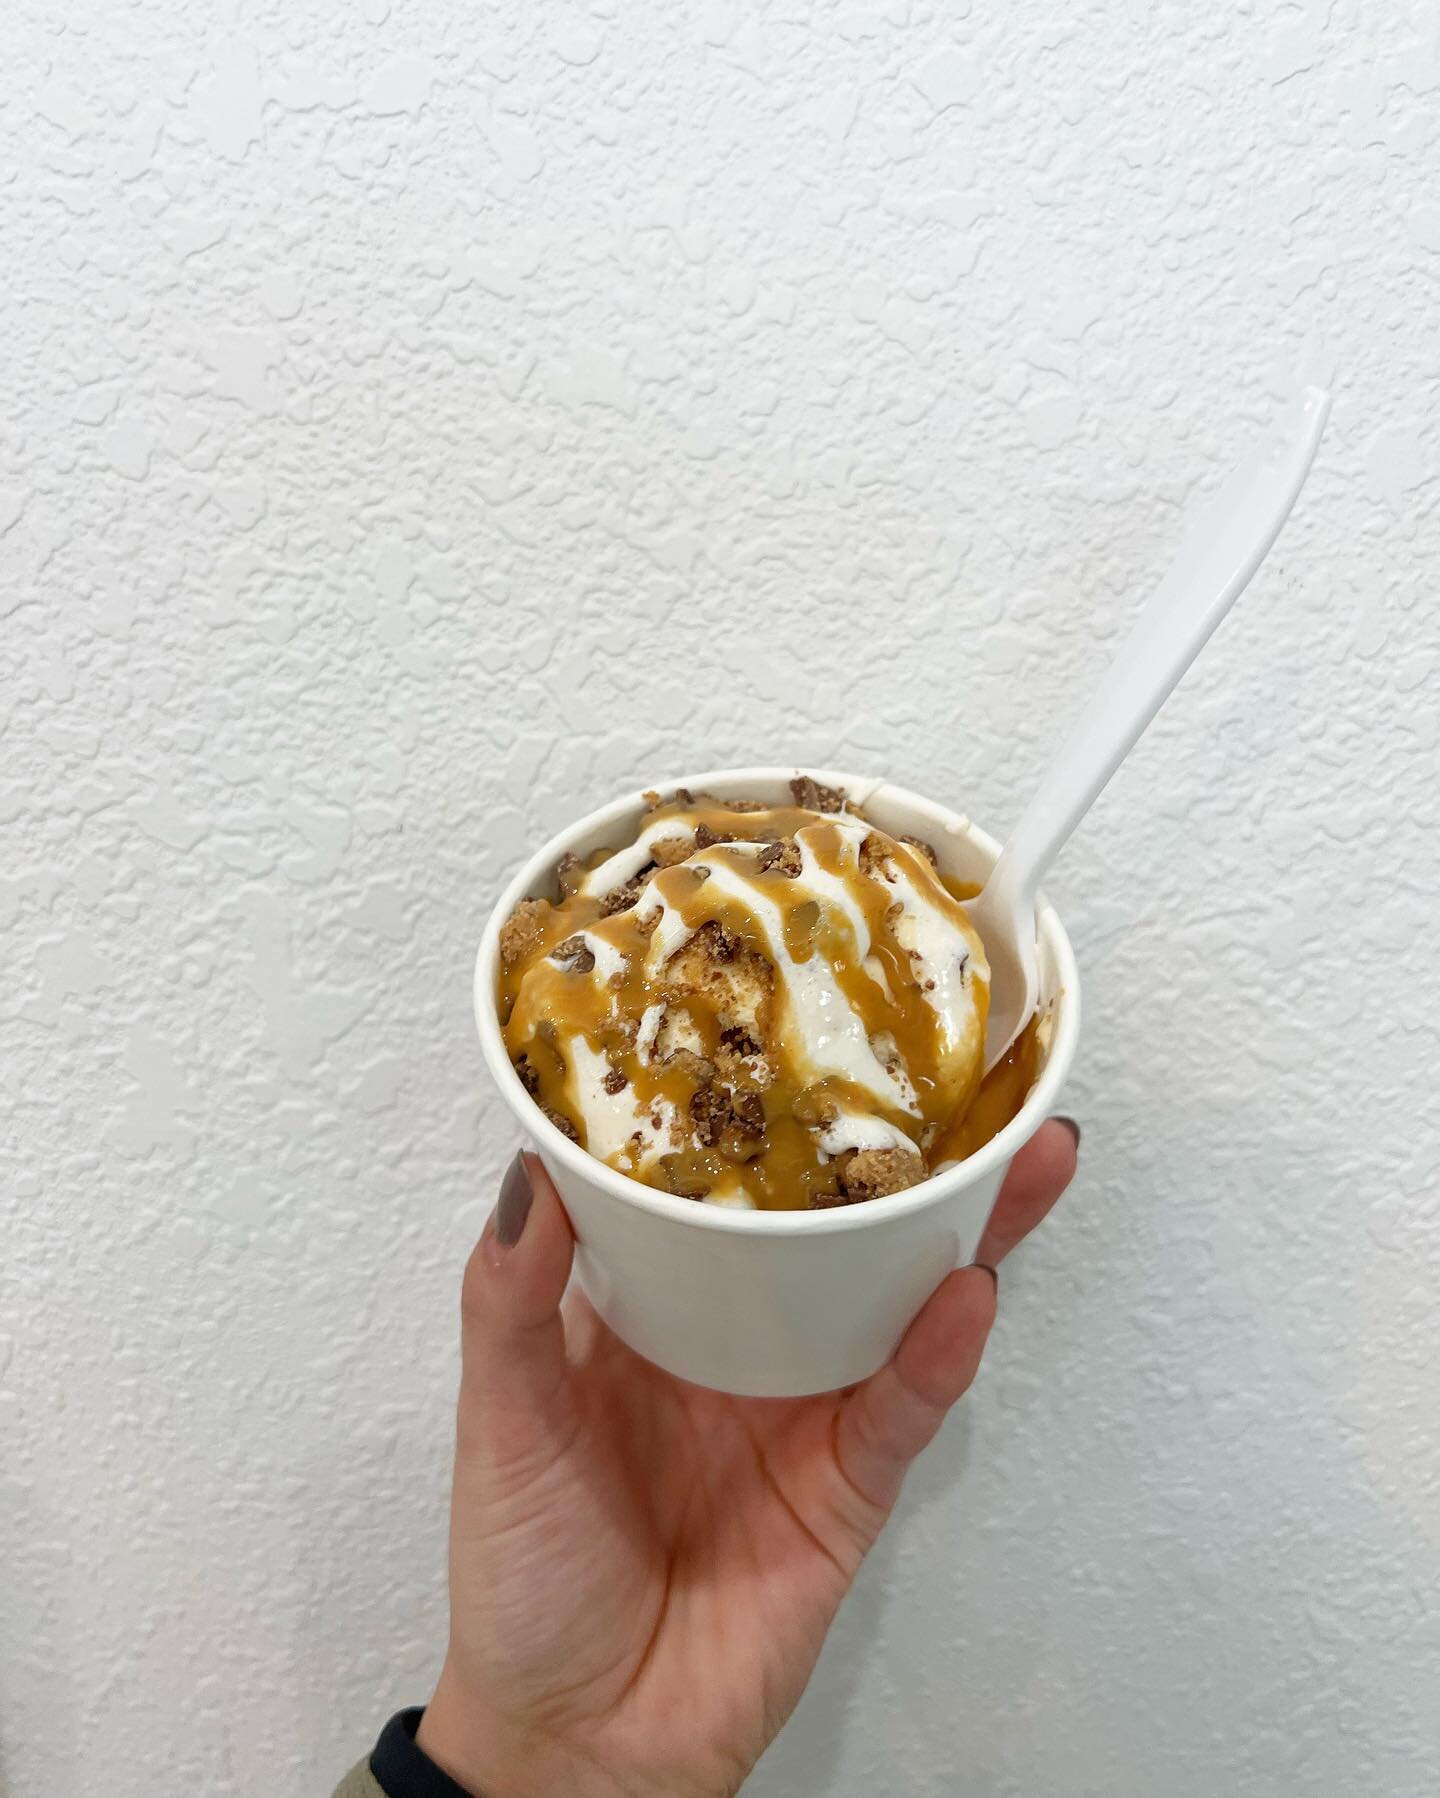 Happy F R I D A Y 🤍 come start your weekend off with a sweet treat from Casey Creamery! 

Pictured 👉🏼 vanilla ice cream, peanut butter sauce, marshmallow sauce and Reese's PB cups 😍 so different and so yummy! 

We're open until 8PM! Come see us!